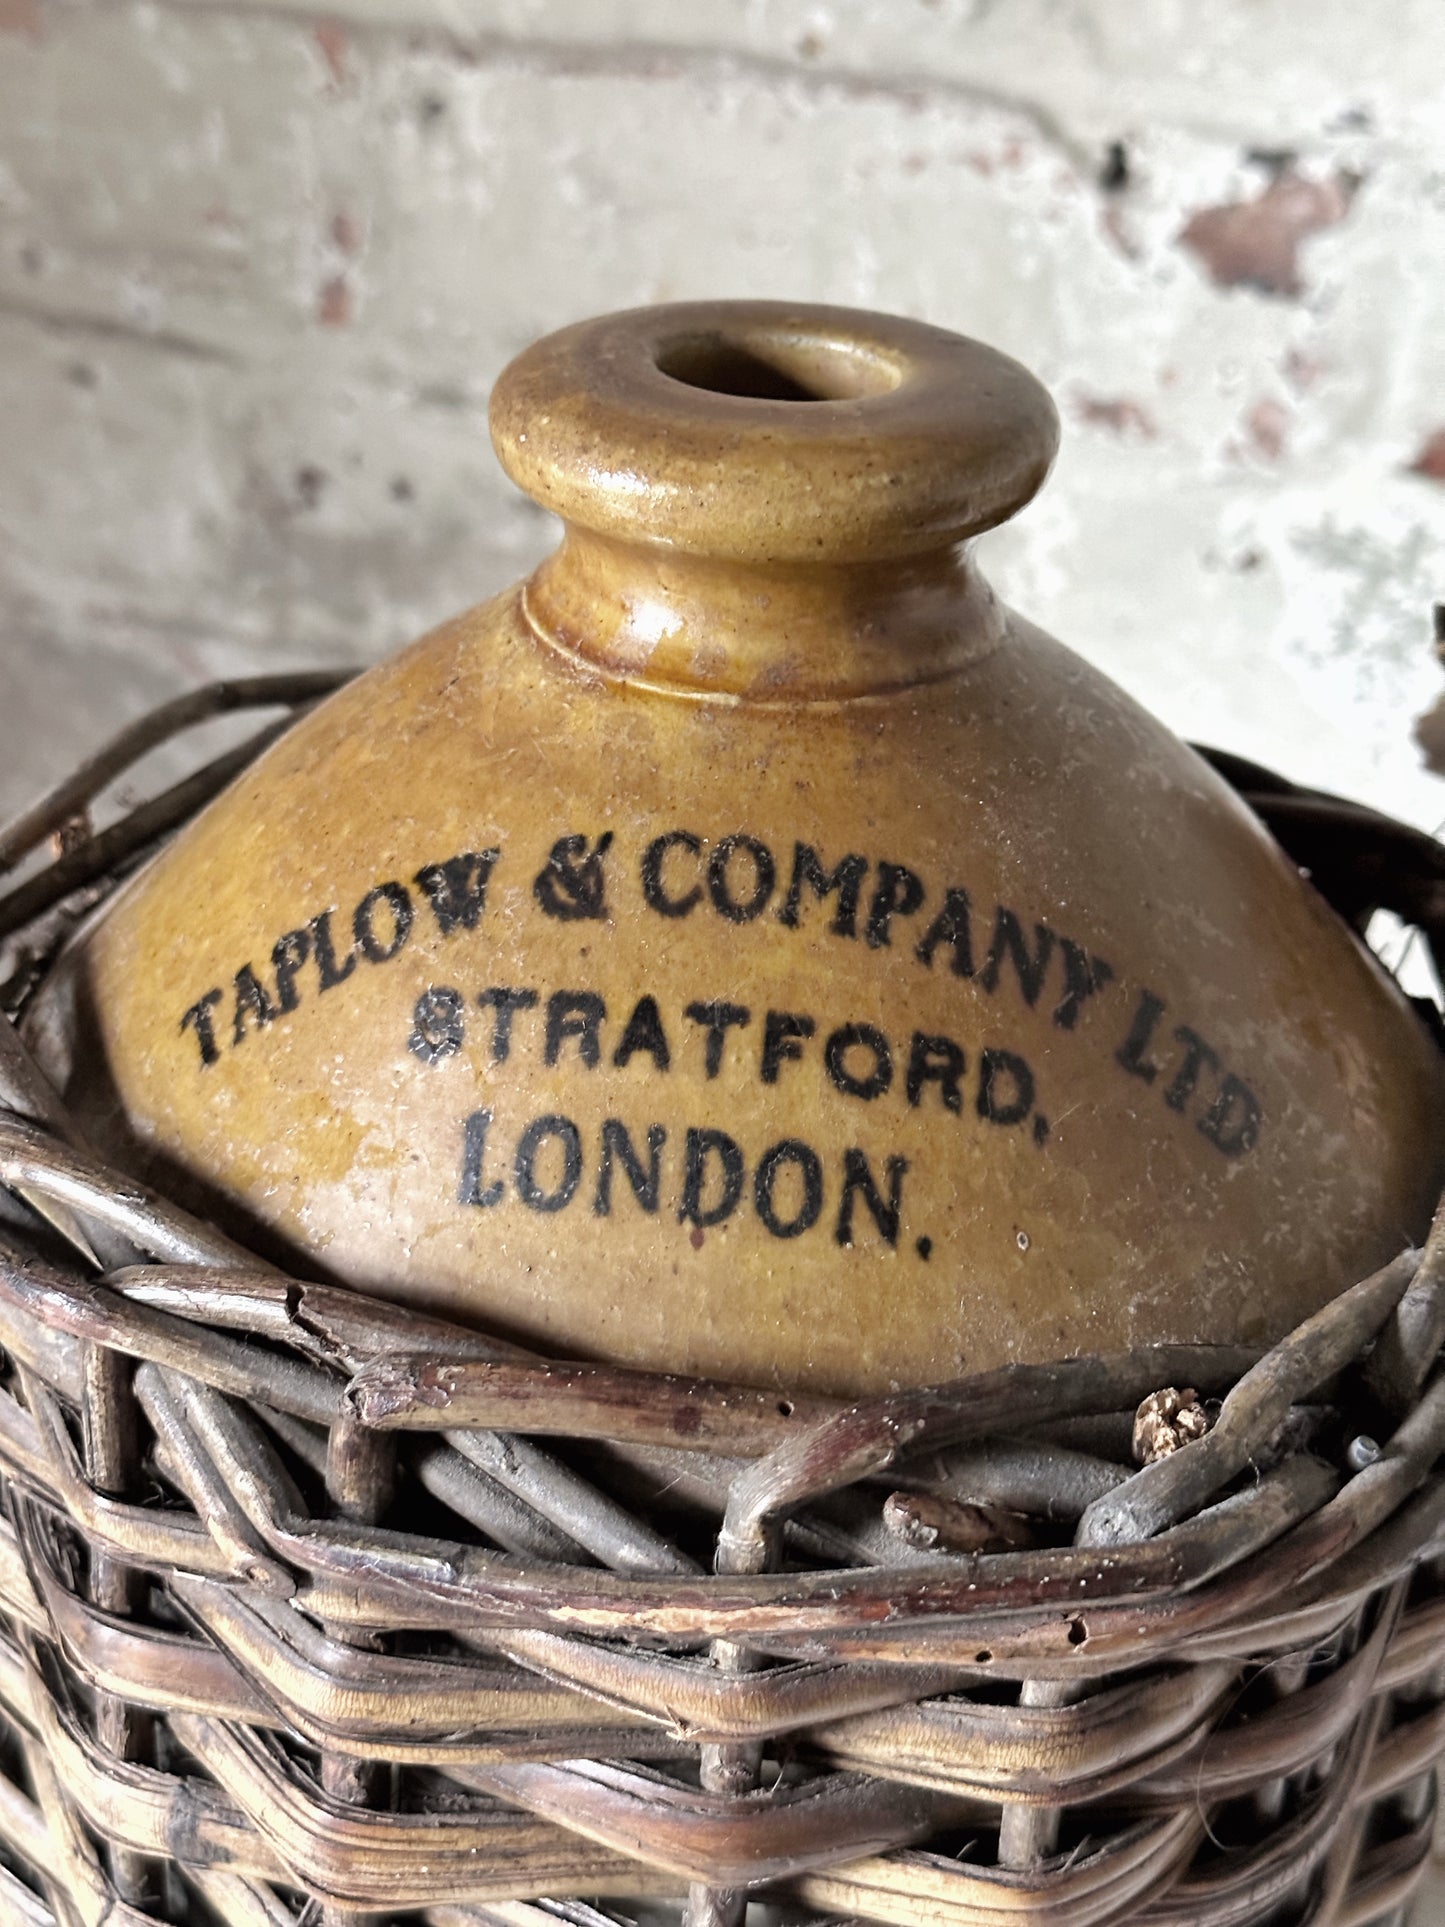 Incredible large wicker wine bottle “Taplow & Company Ltd. Stratford” by Skey Tamworth